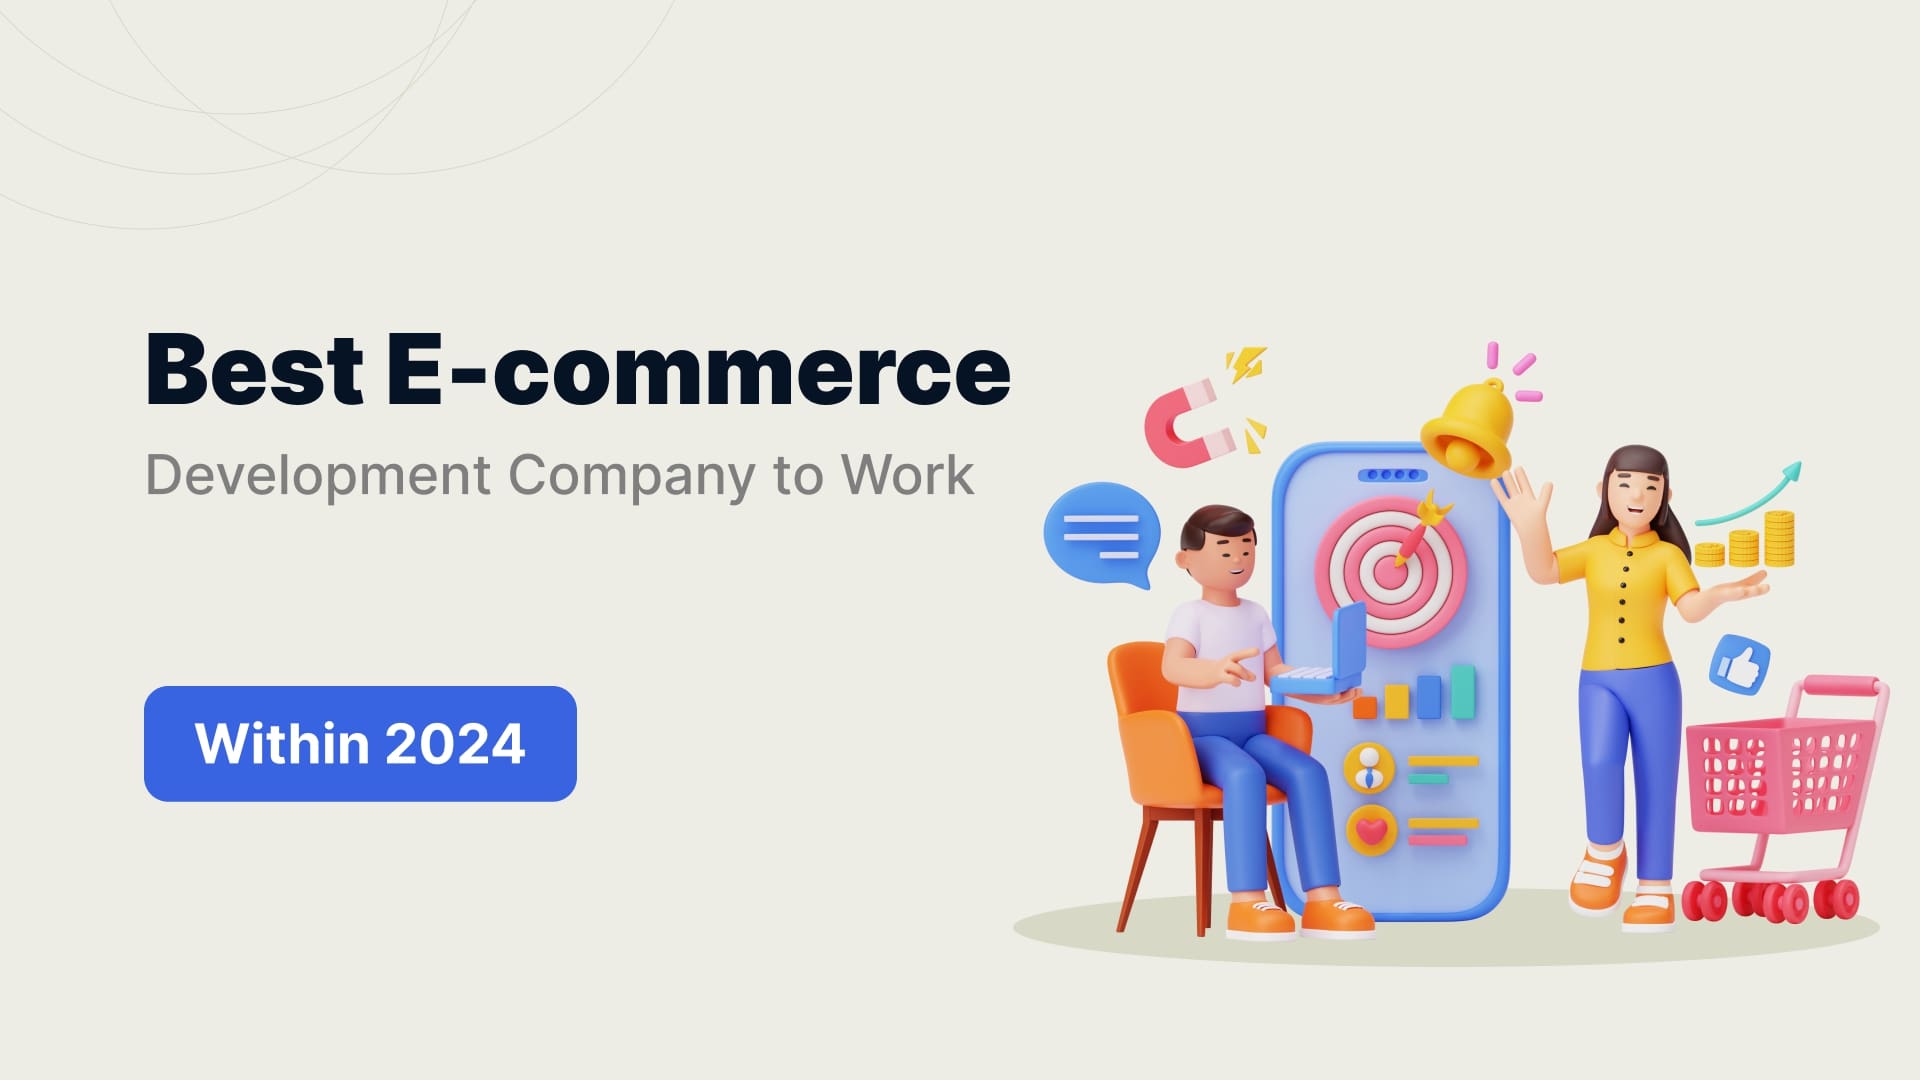 Best E-commerce Development Company to Work Within 2024